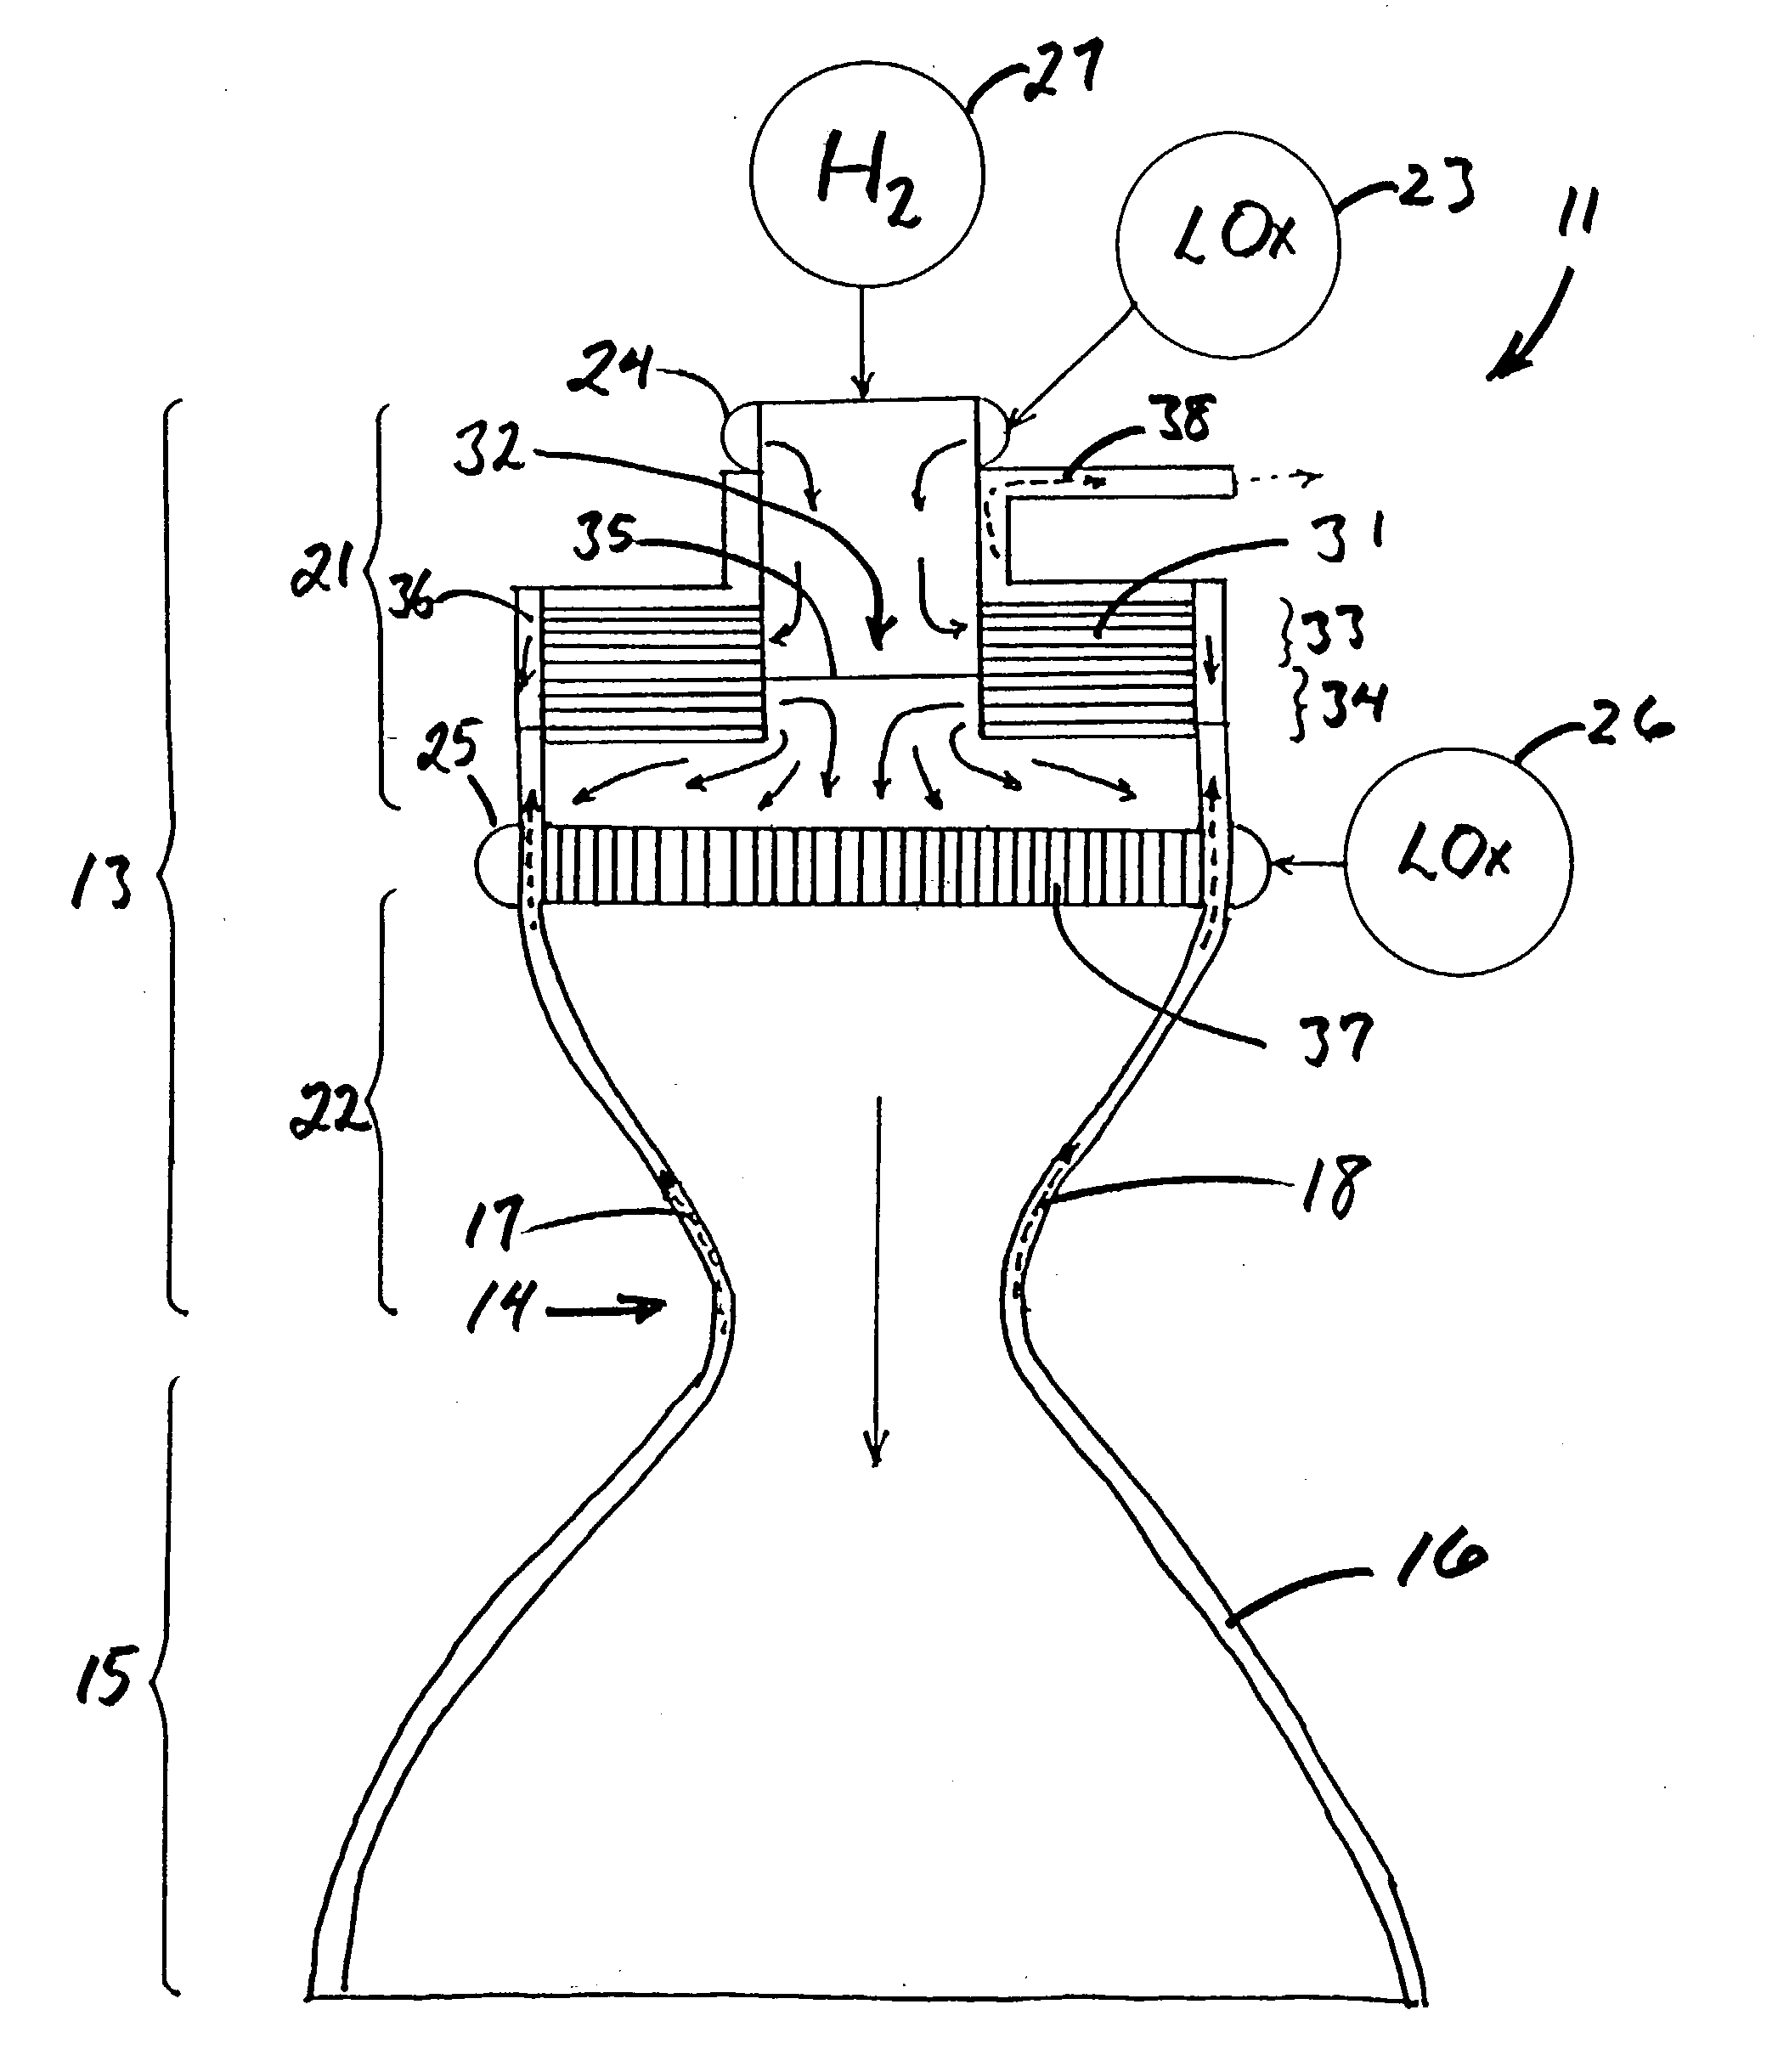 Expander cycle rocket engine with staged combustion and heat exchange